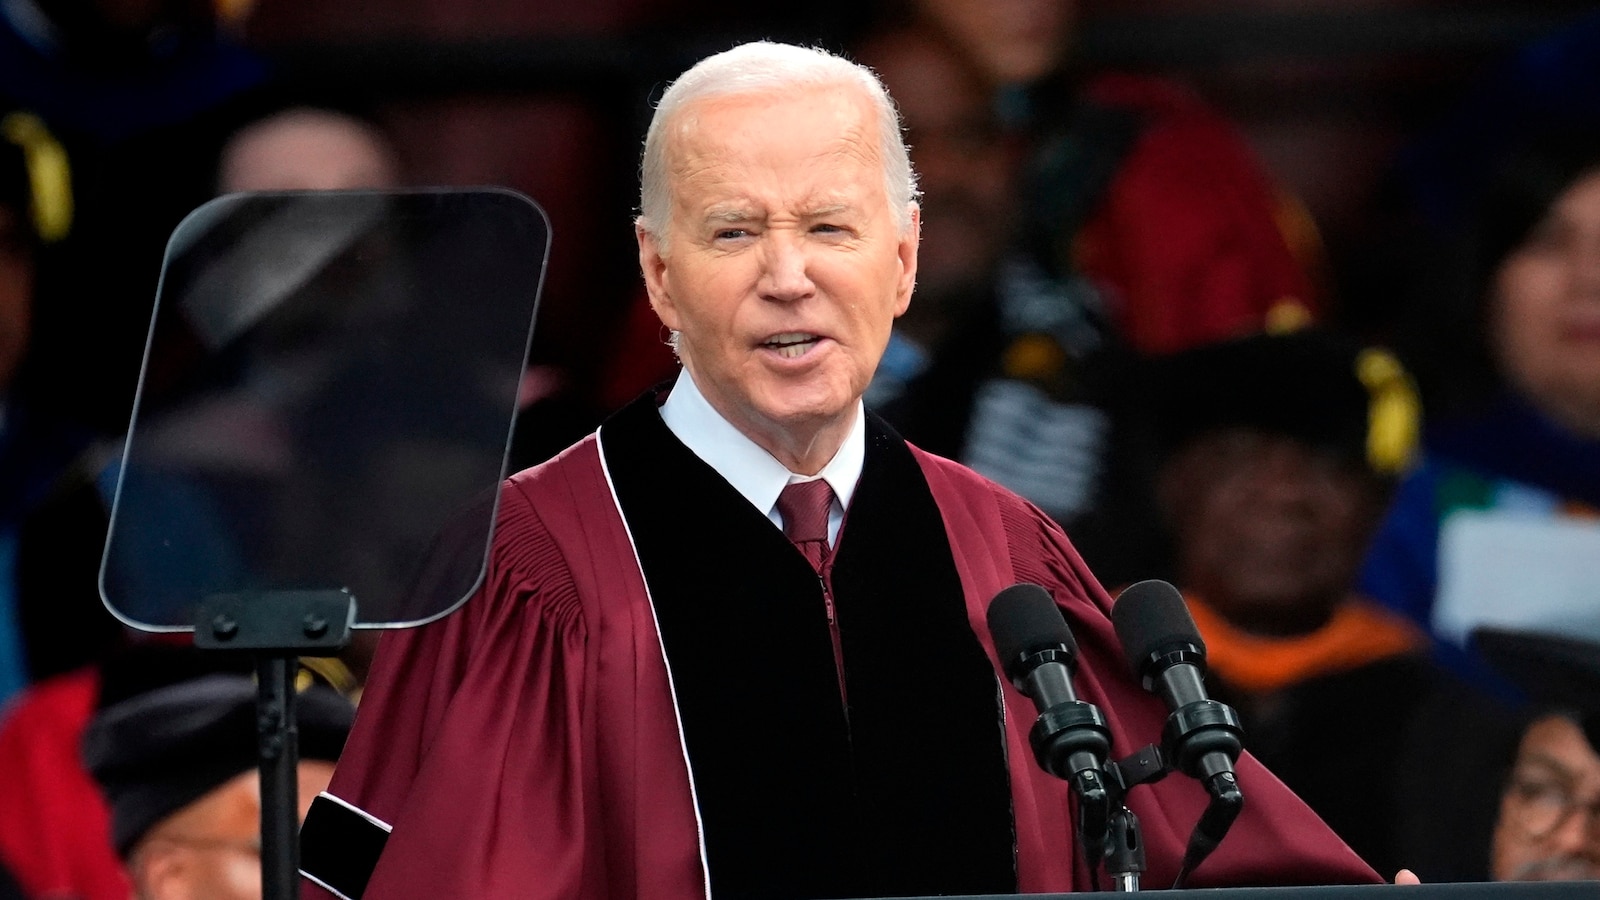 Biden faces silent protests at Morehouse commencement [Video]